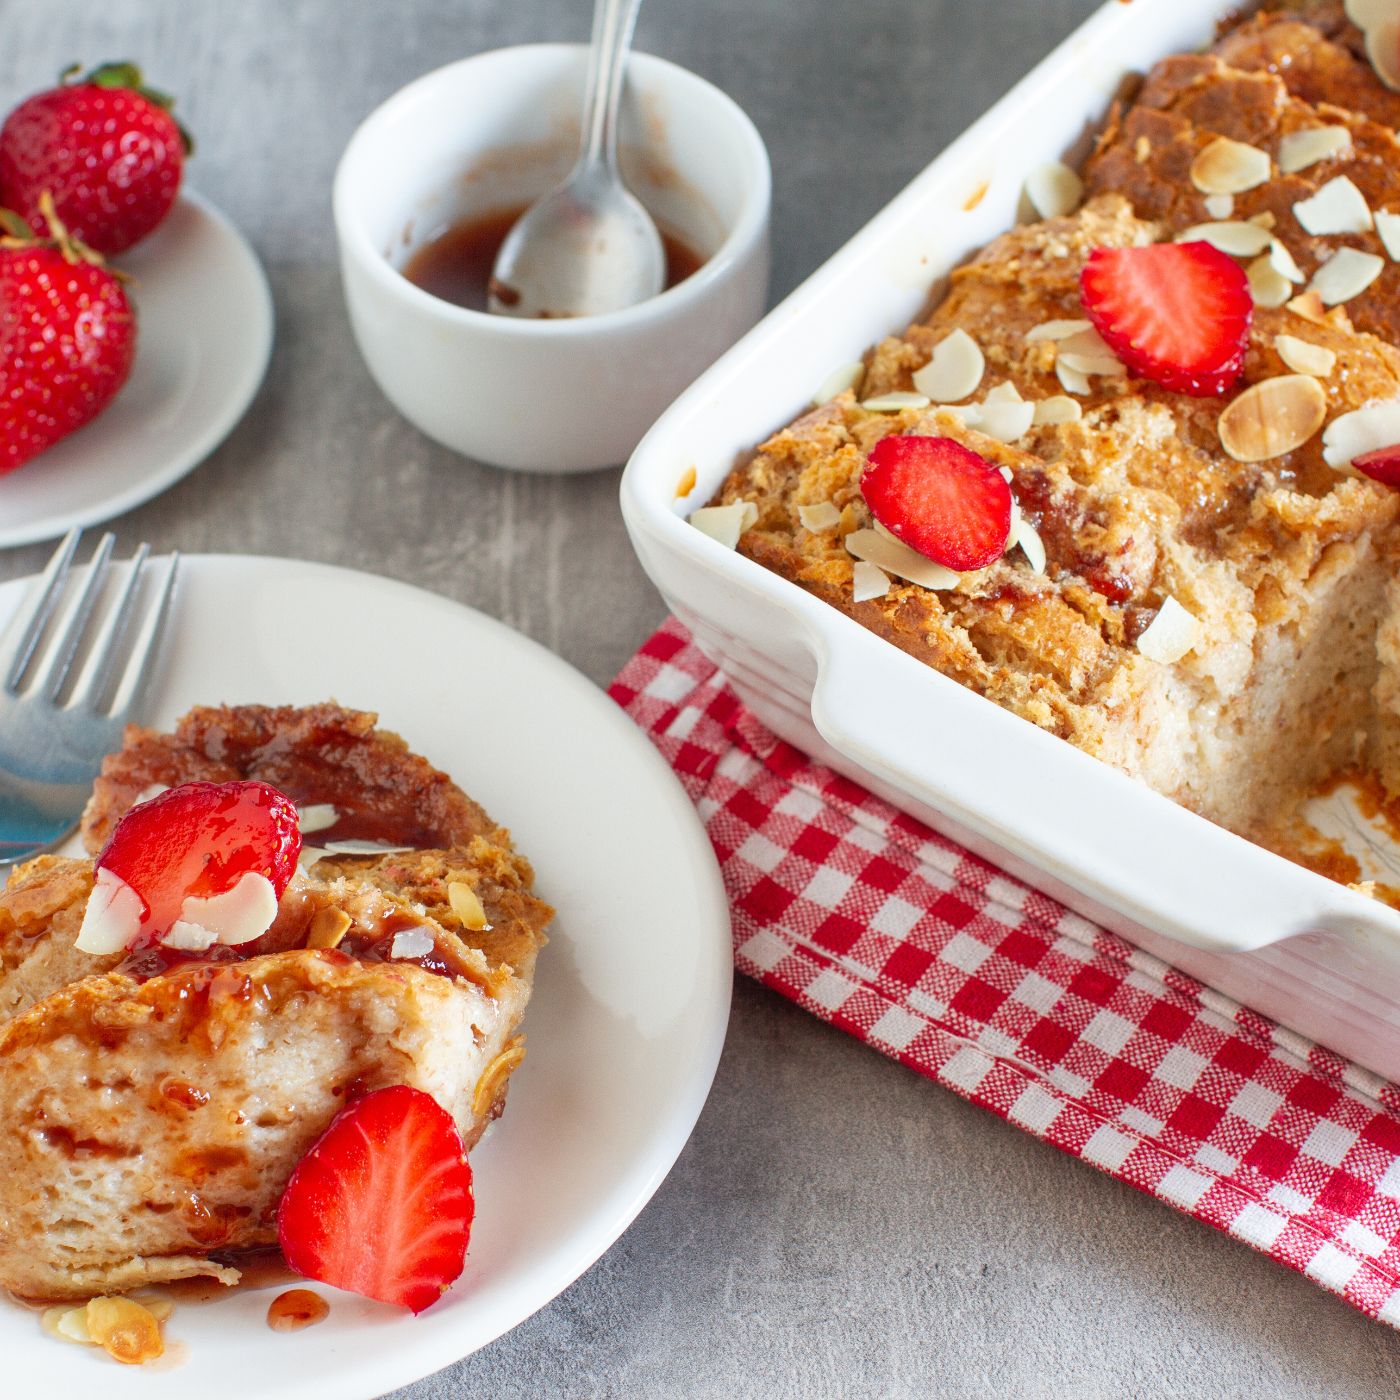 Homemade-pudding-made-by-leftovers-bread-and-strawberries-1385363664_3869x2579 square.jpeg